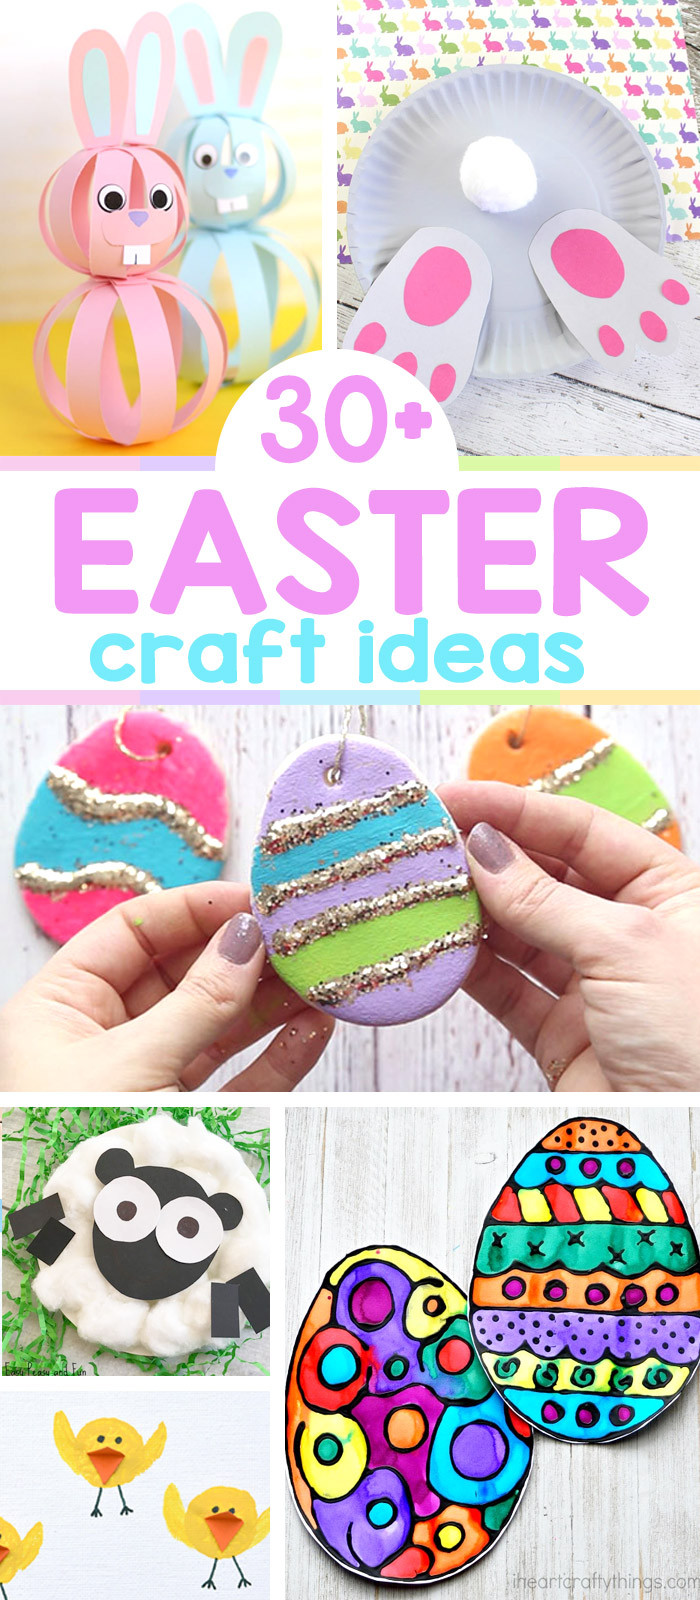 Fun Crafts For Toddlers
 25 Easter Crafts for Kids Lots of Crafty Ideas Easy